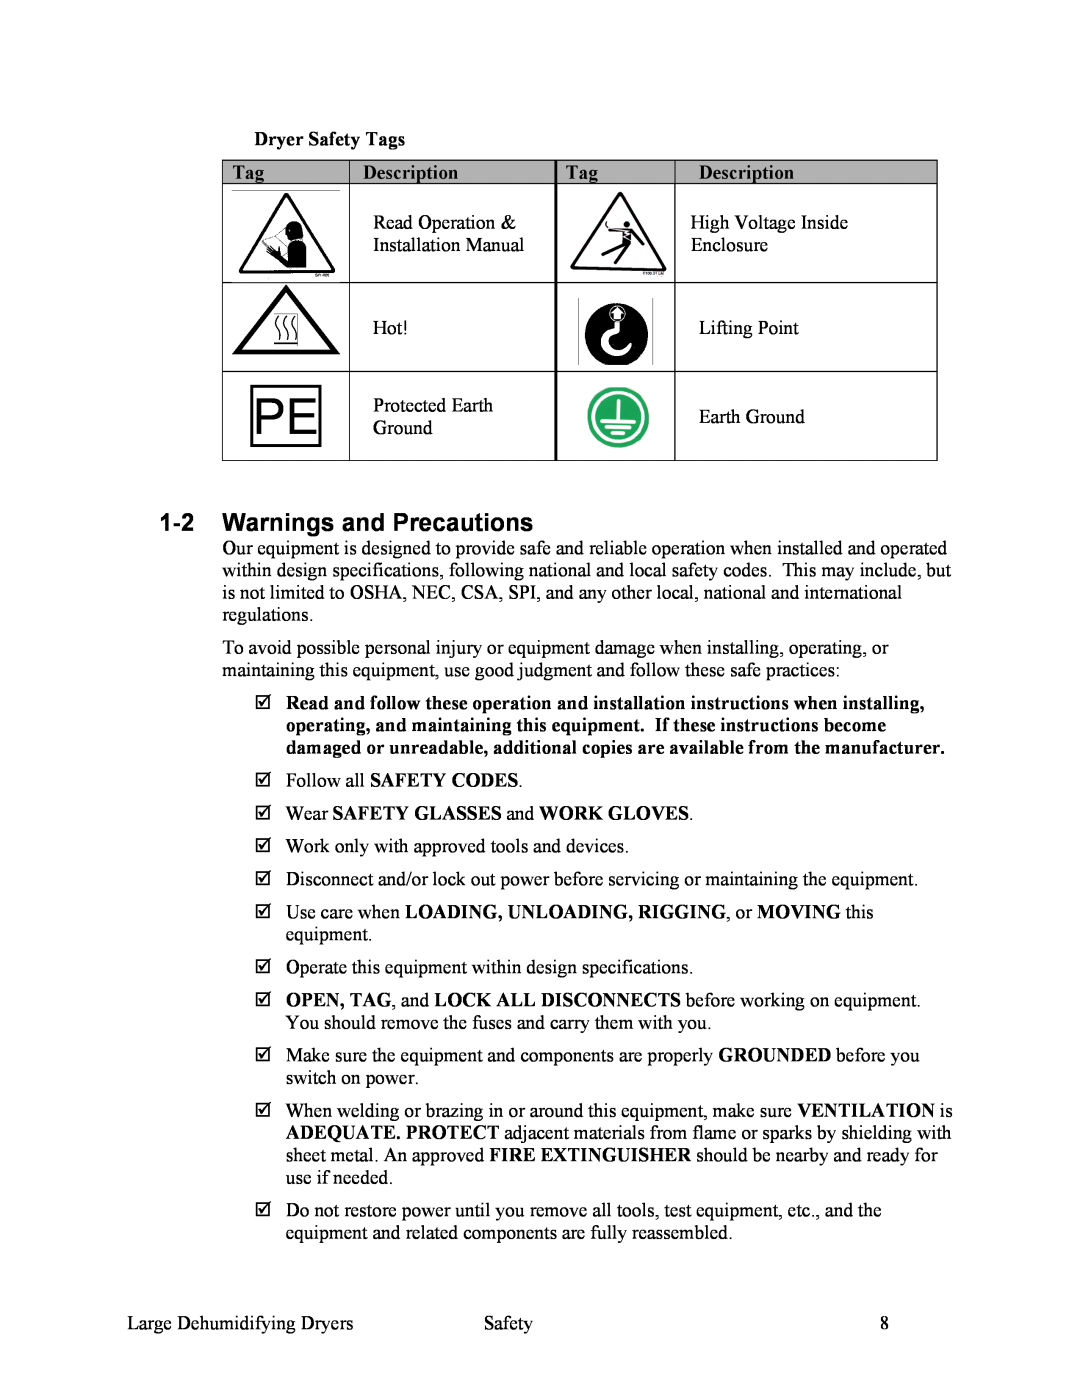 Sterling SDA 1000-5100 1-2Warnings and Precautions, Dryer Safety Tags, Description, Wear SAFETY GLASSES and WORK GLOVES 